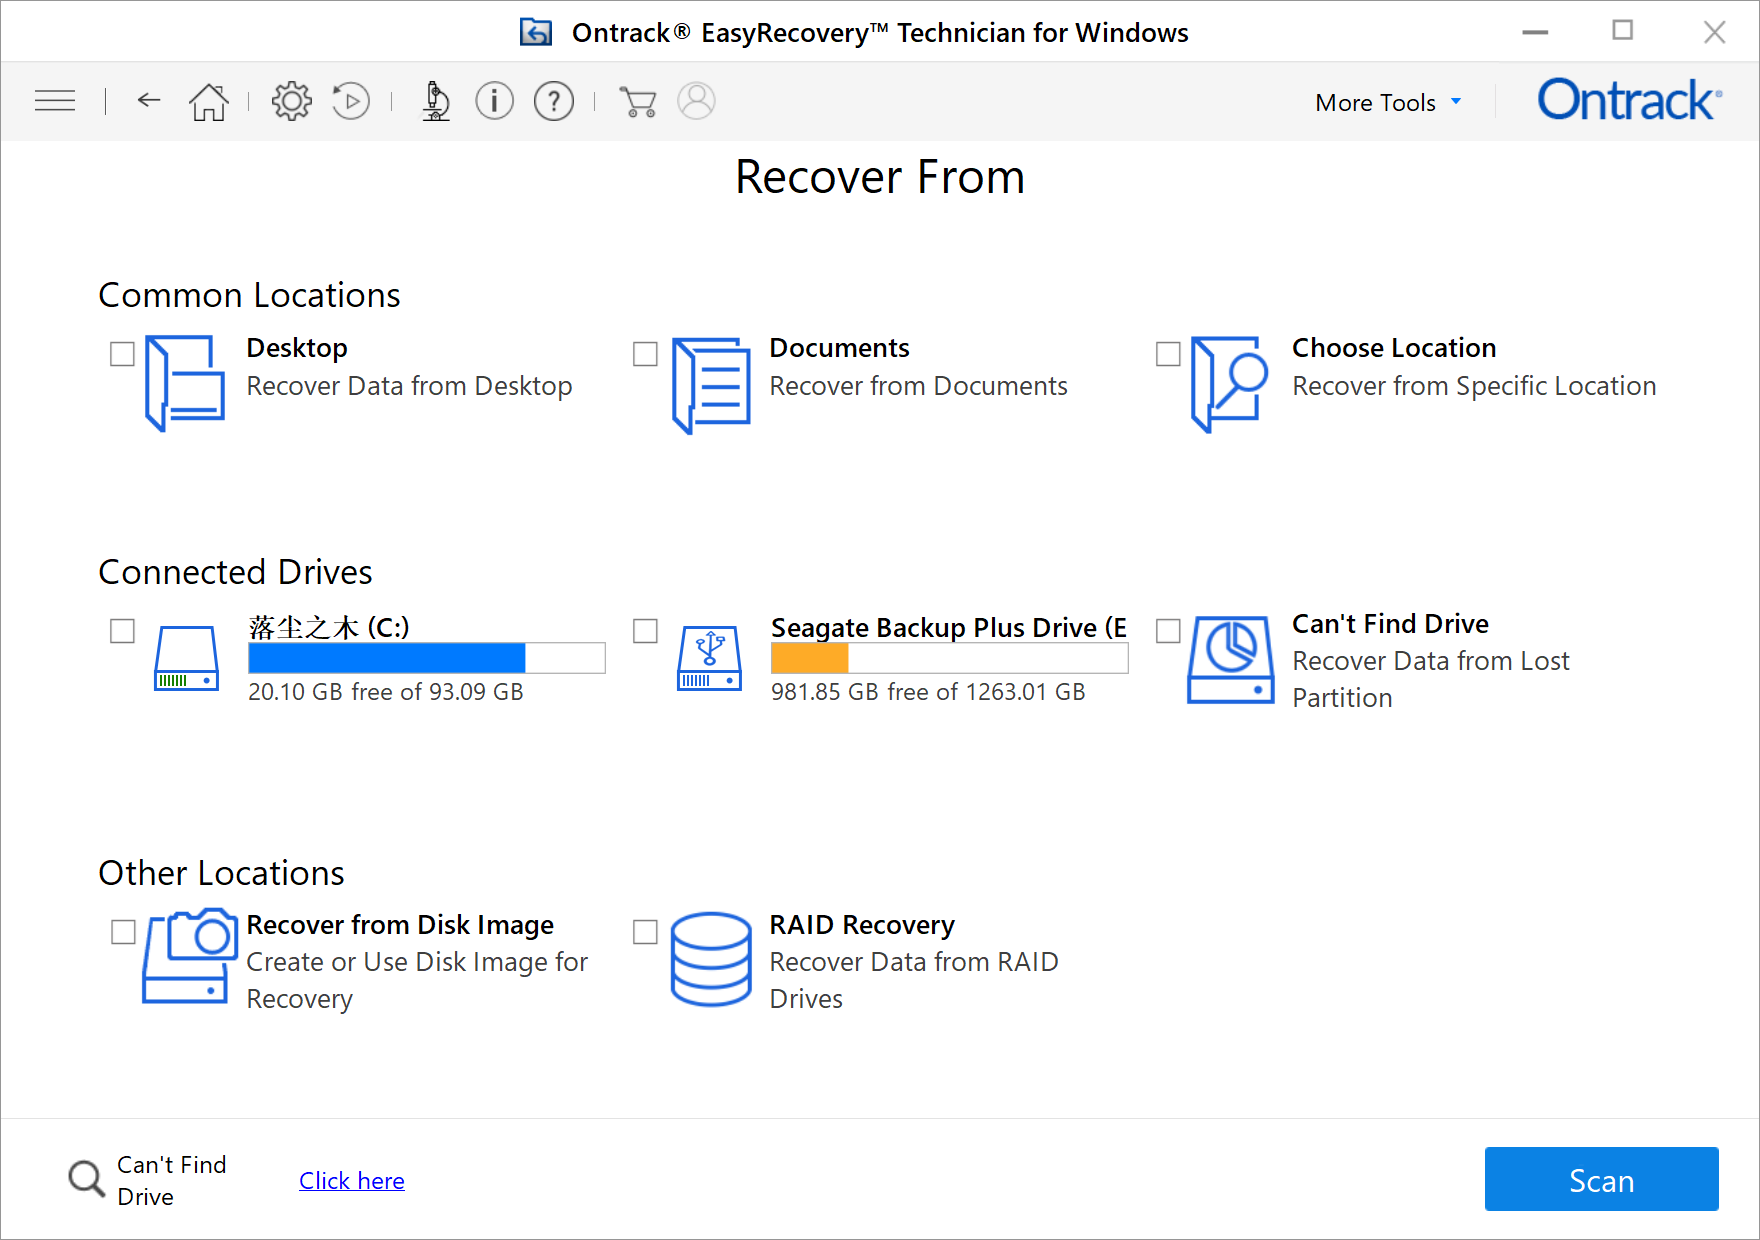 Ontrack EasyRecovery Professional / Premium / Technician 14.0.0.0 for Windows